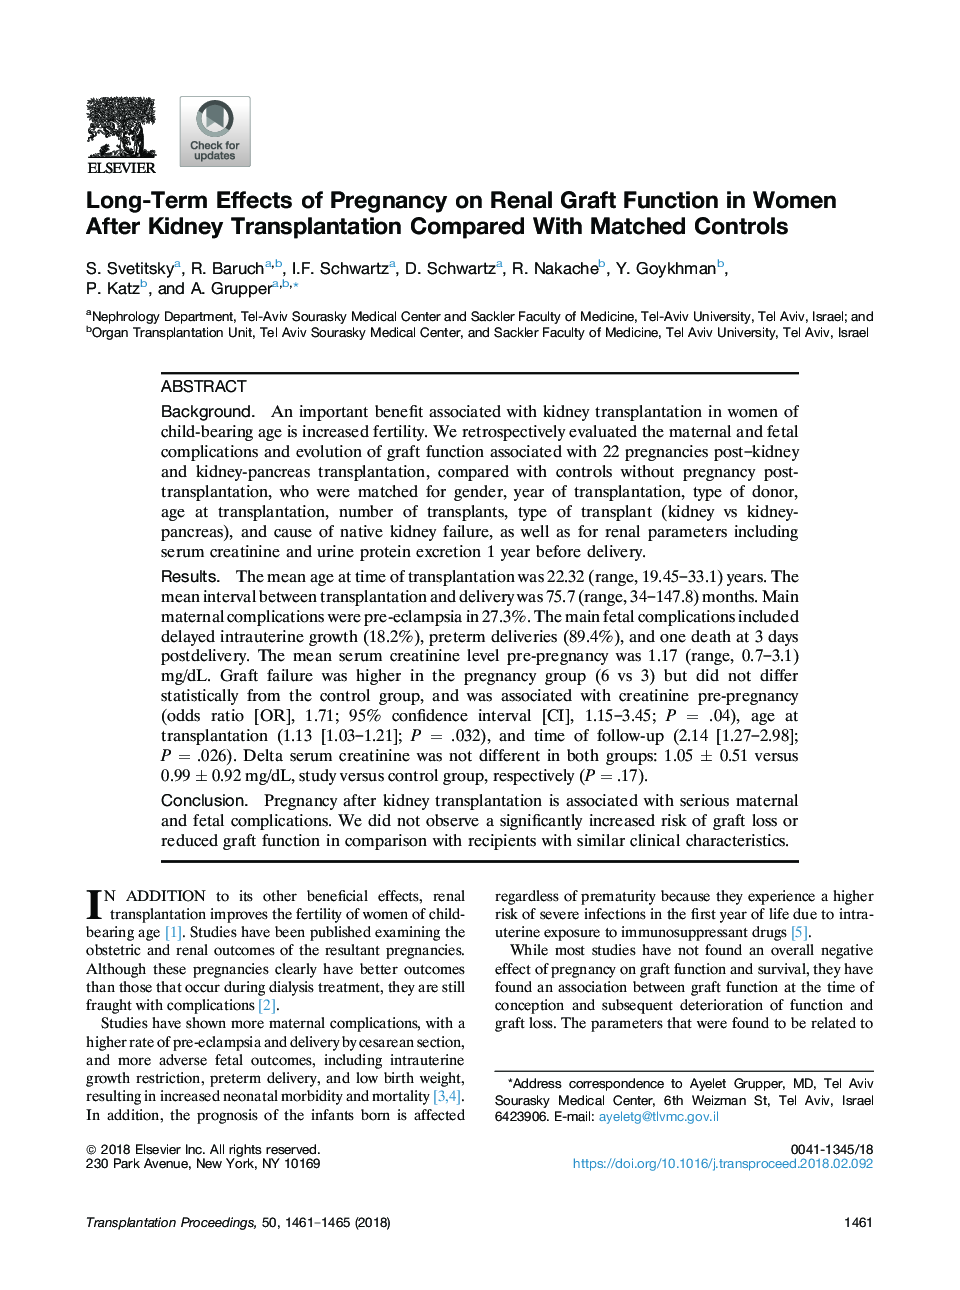 Long-Term Effects of Pregnancy on Renal Graft Function in Women After Kidney Transplantation Compared With Matched Controls